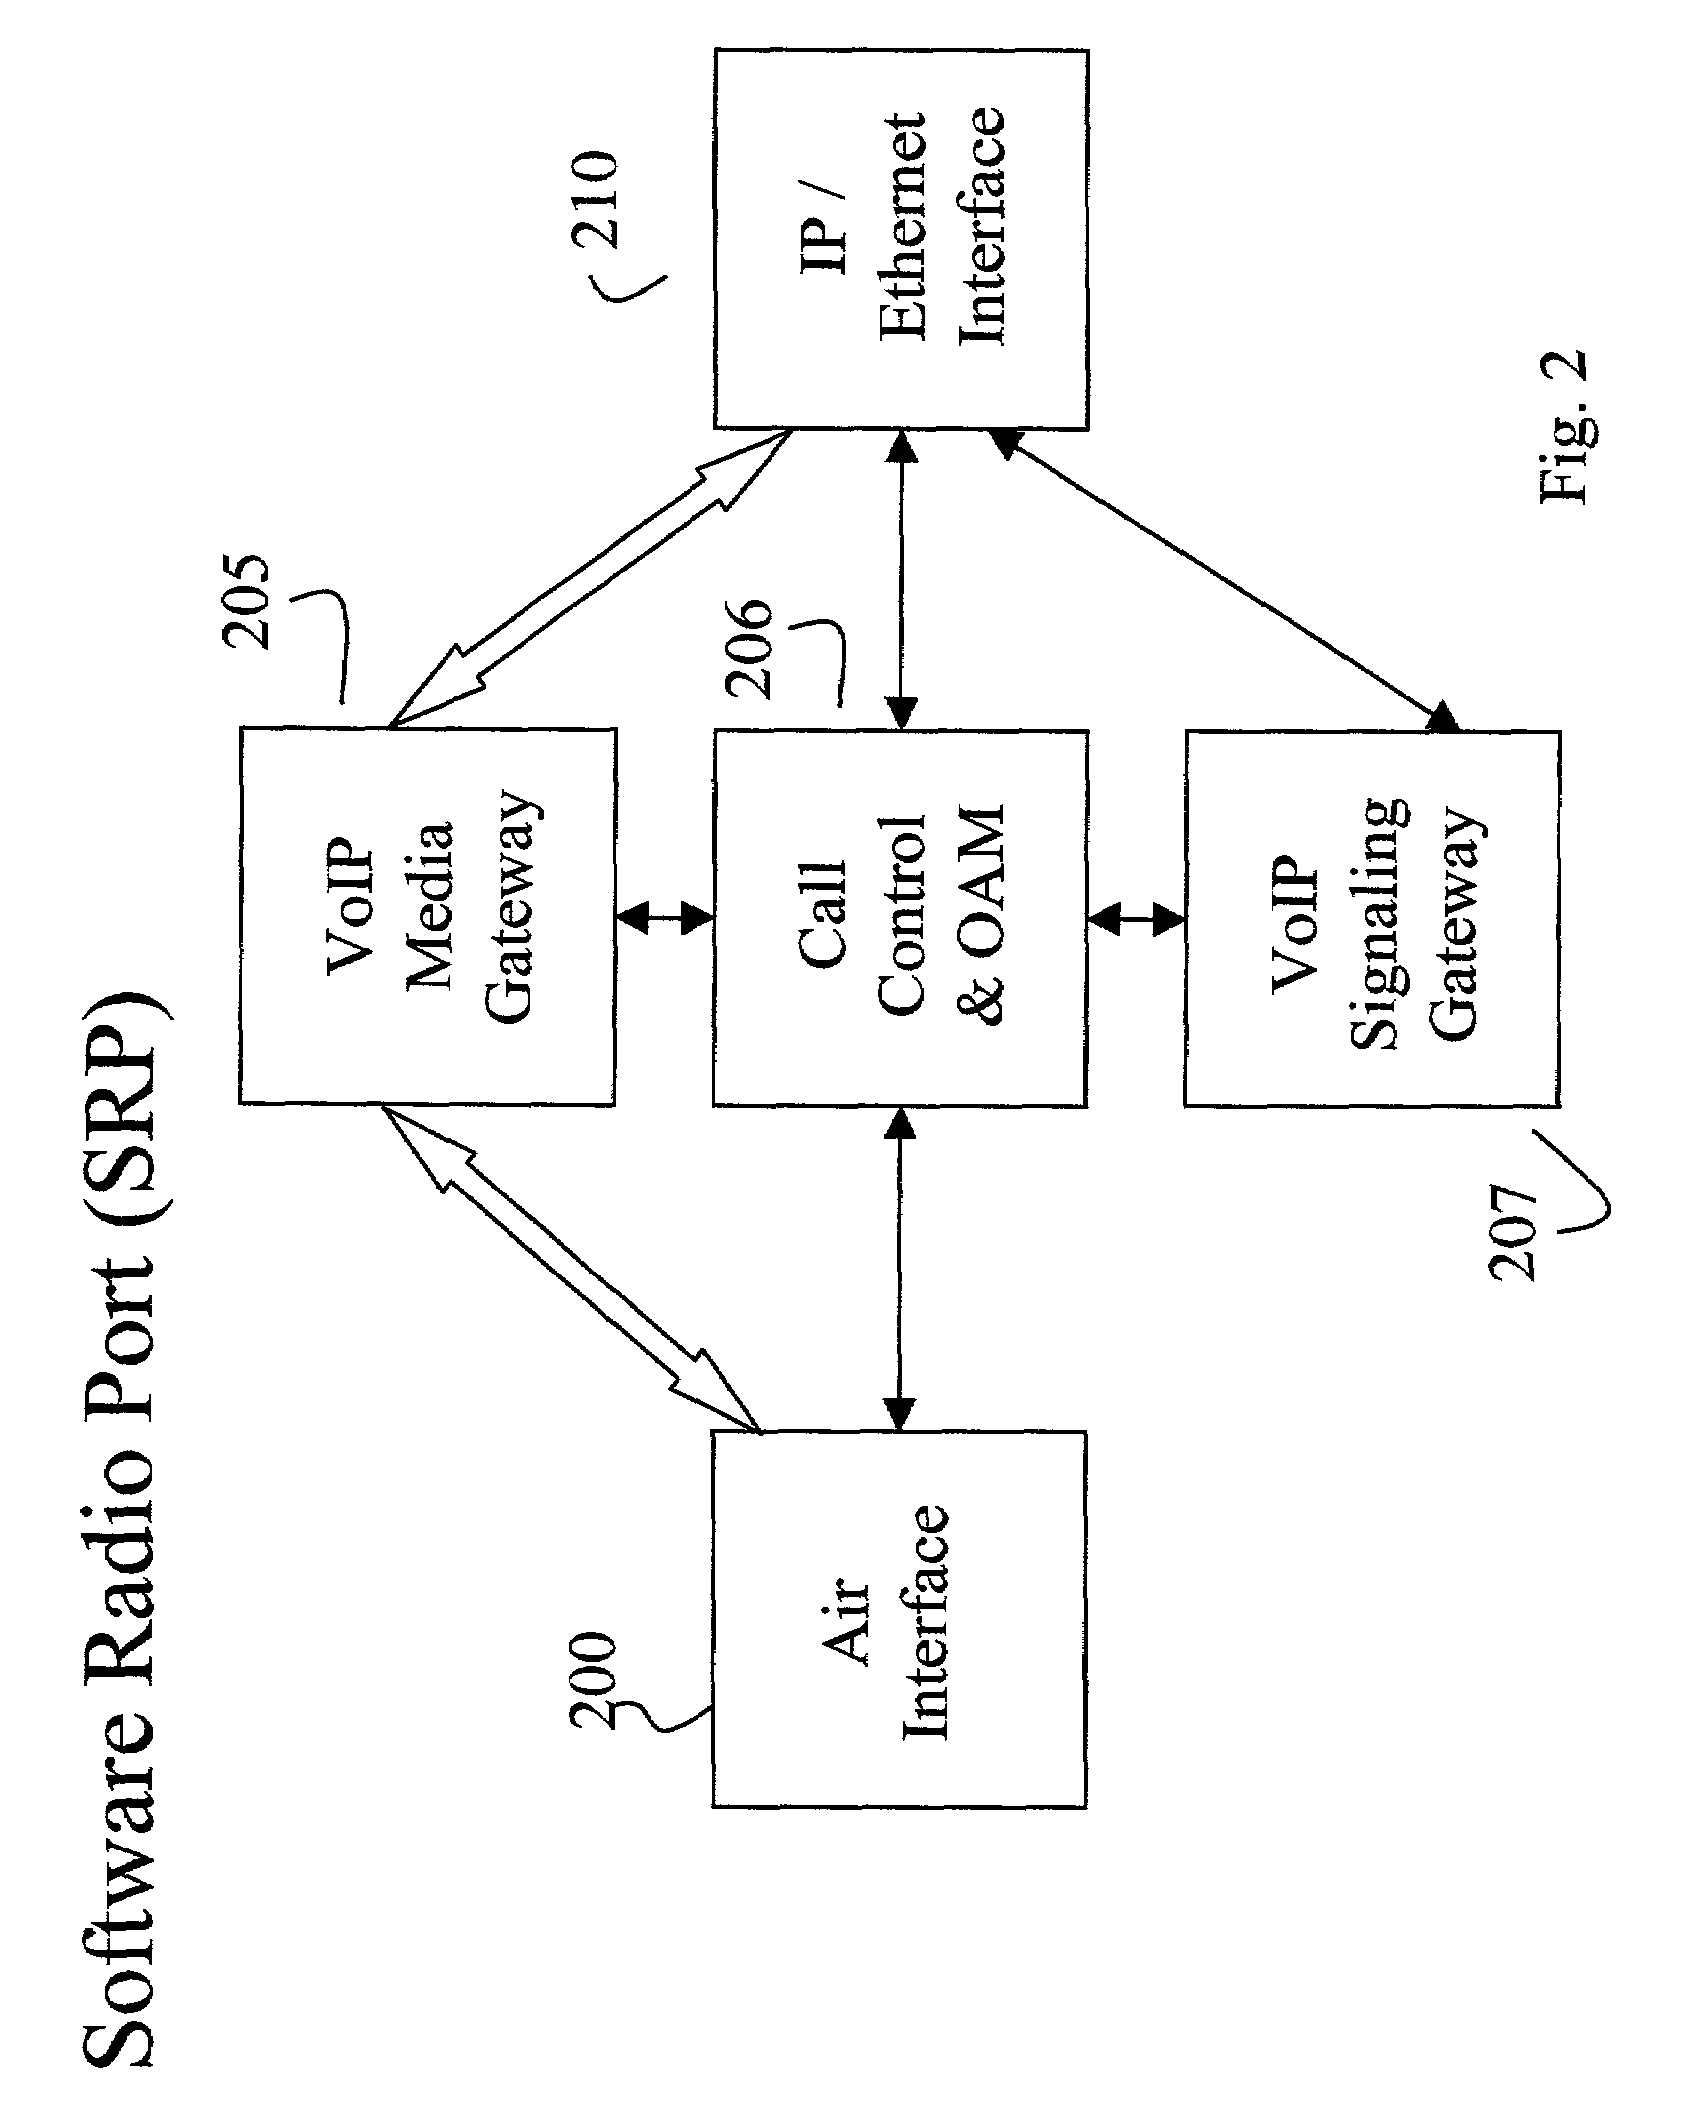 Method for providing VoIP services for wireless terminals